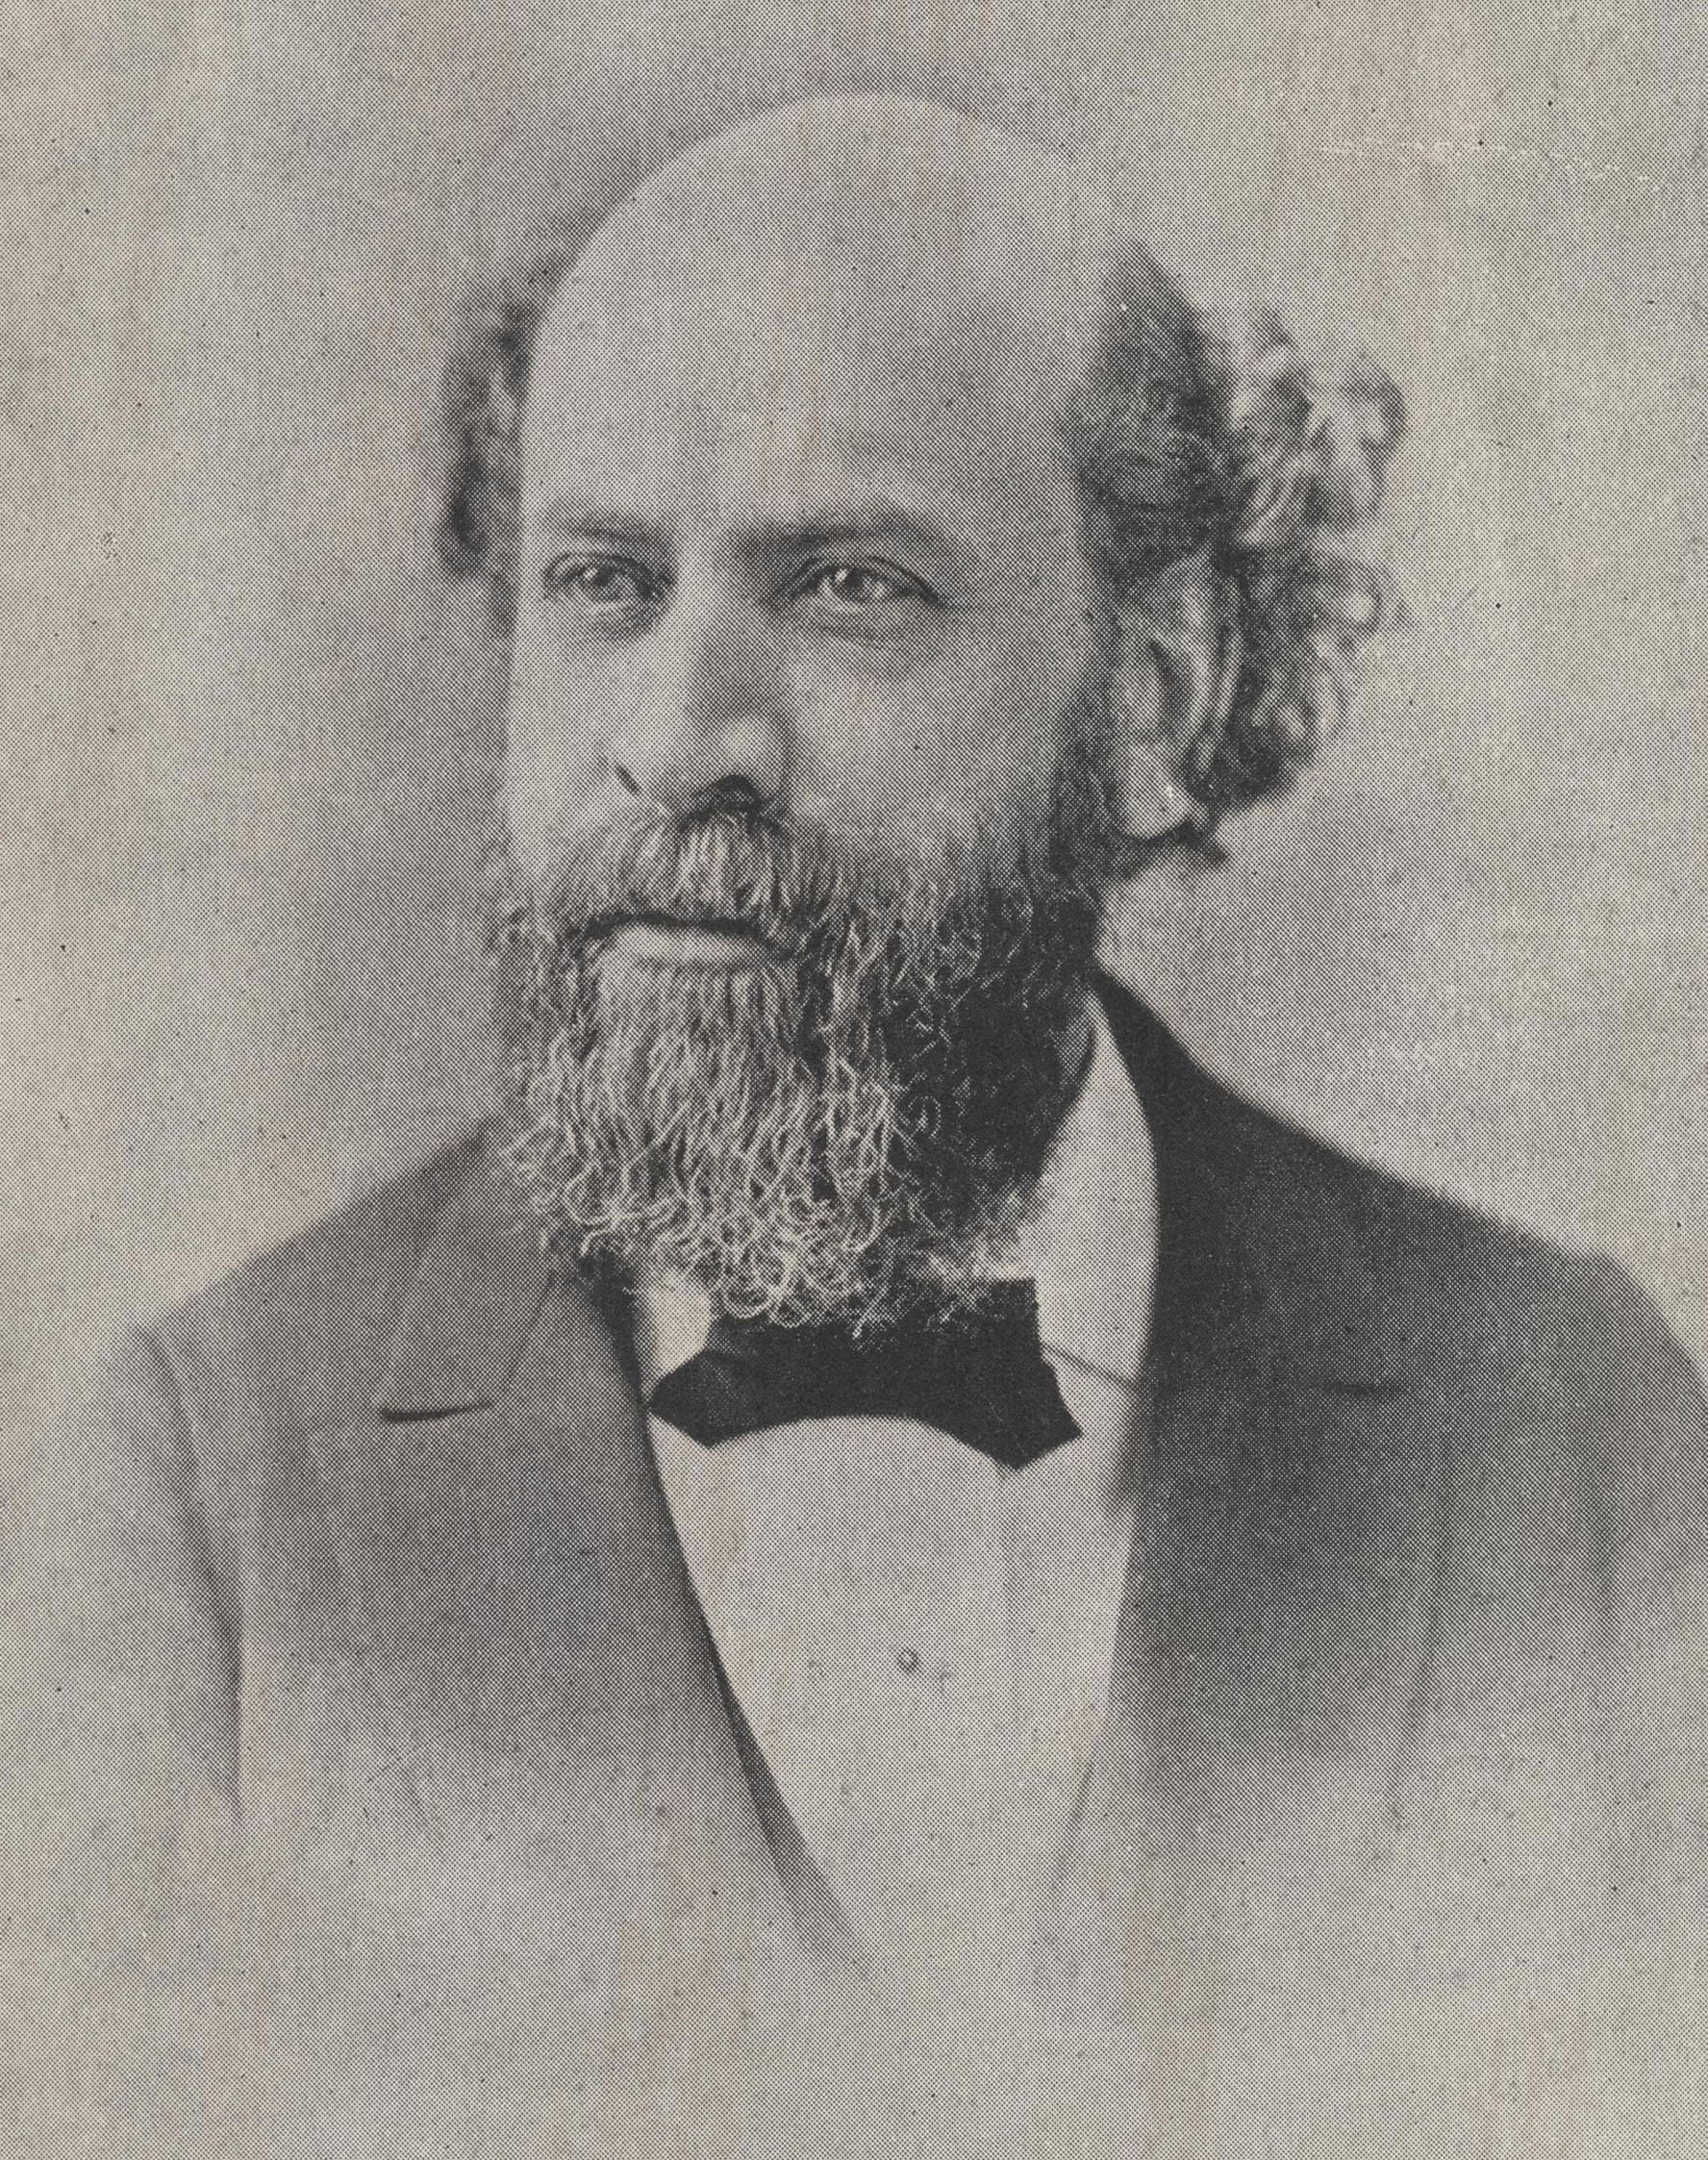 Portrait image of Eben Tourjee, NEC founder and first Director